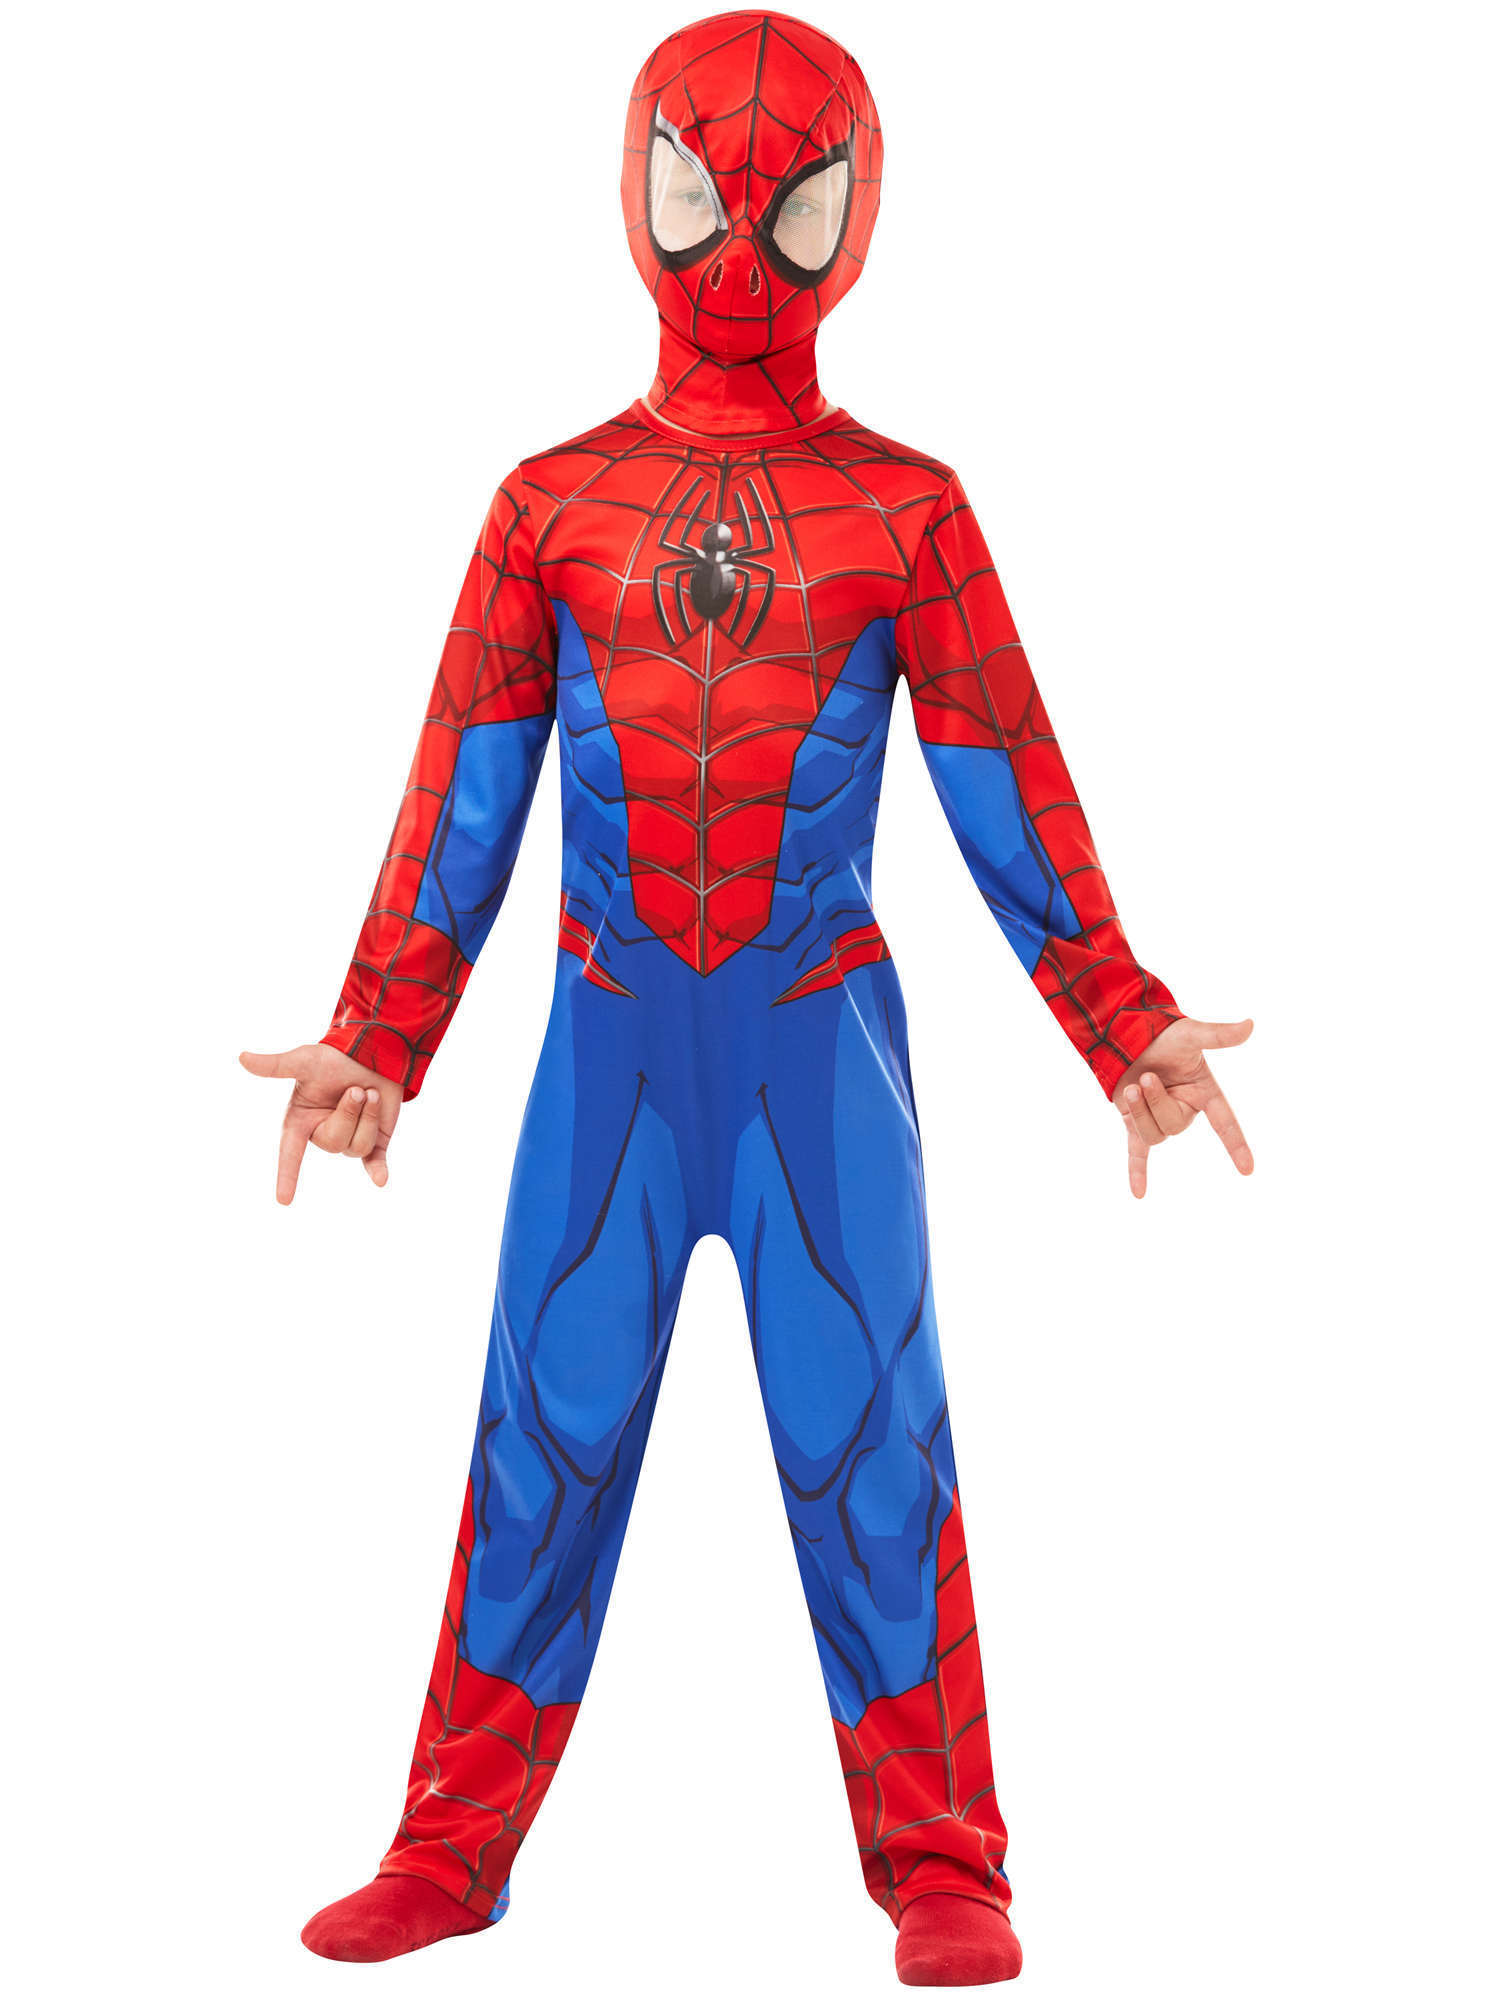 Spider-Man, Avengers, Multi, Marvel, Kids Costumes, Small, Front